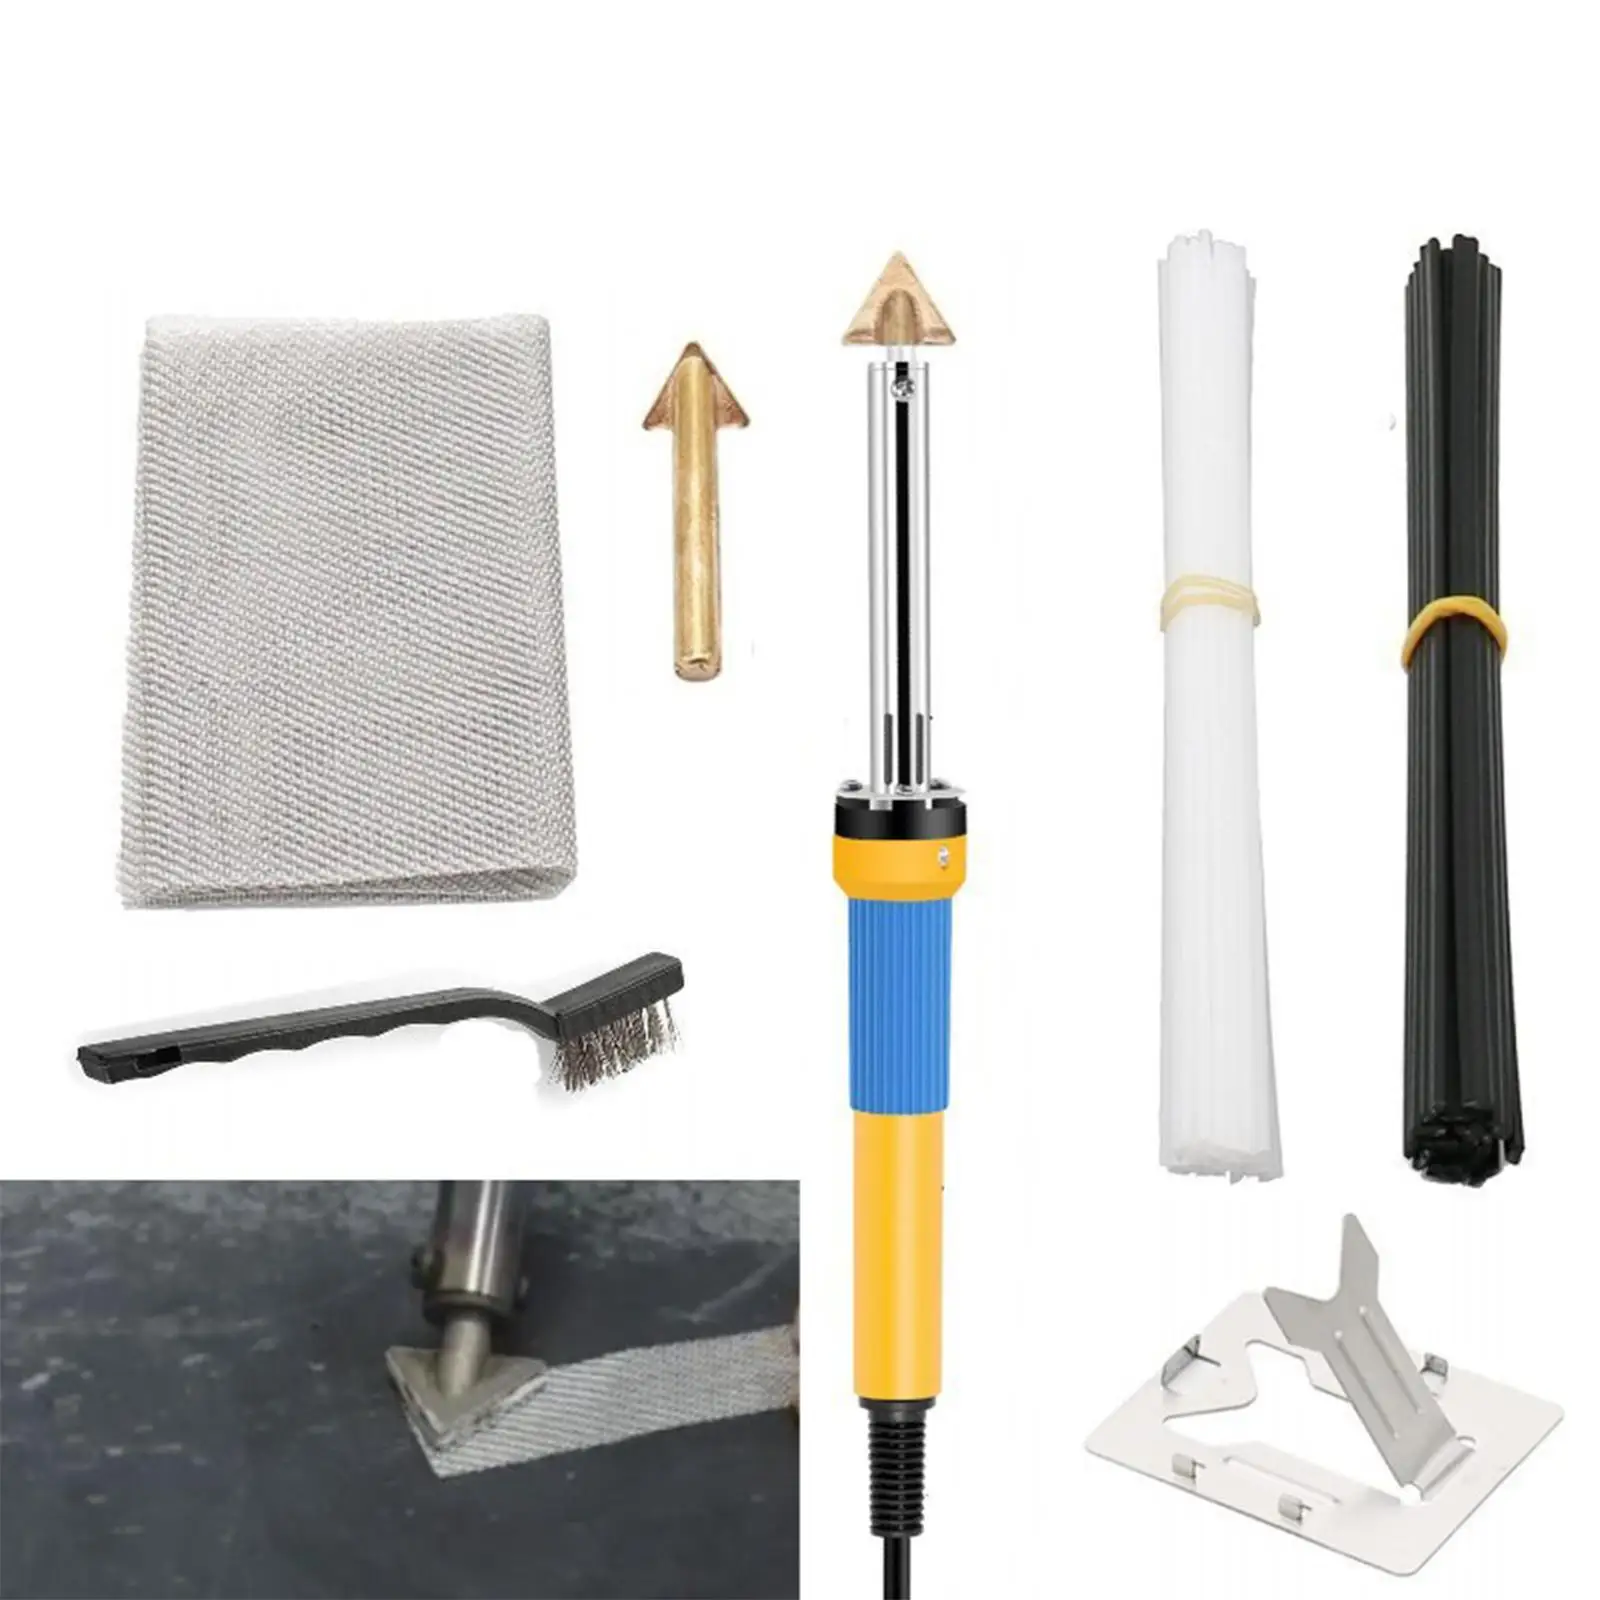 

Professional Crack Repairing Spatula for Auto Repair with Welding Rods Spatula Smoothing Tool Welding Repairing